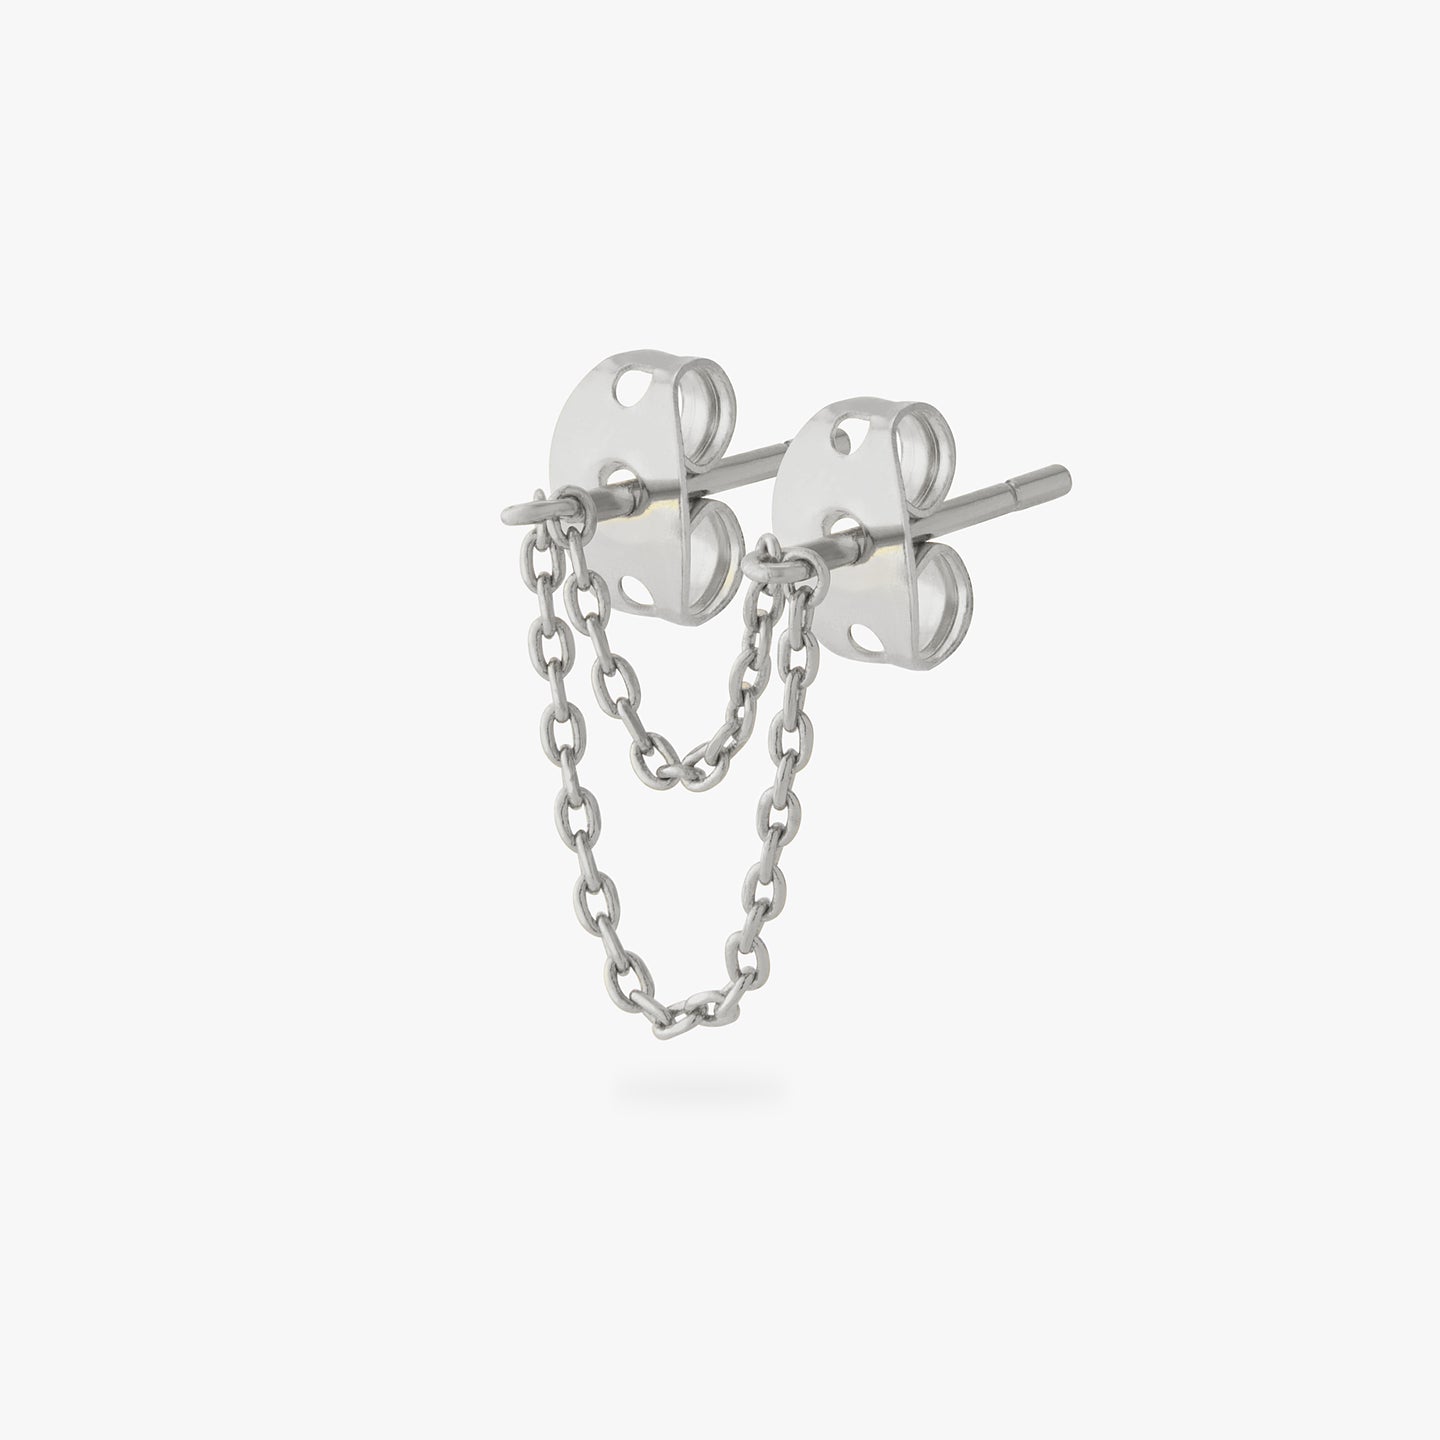 A silver double chain connector earring. color:null|silver